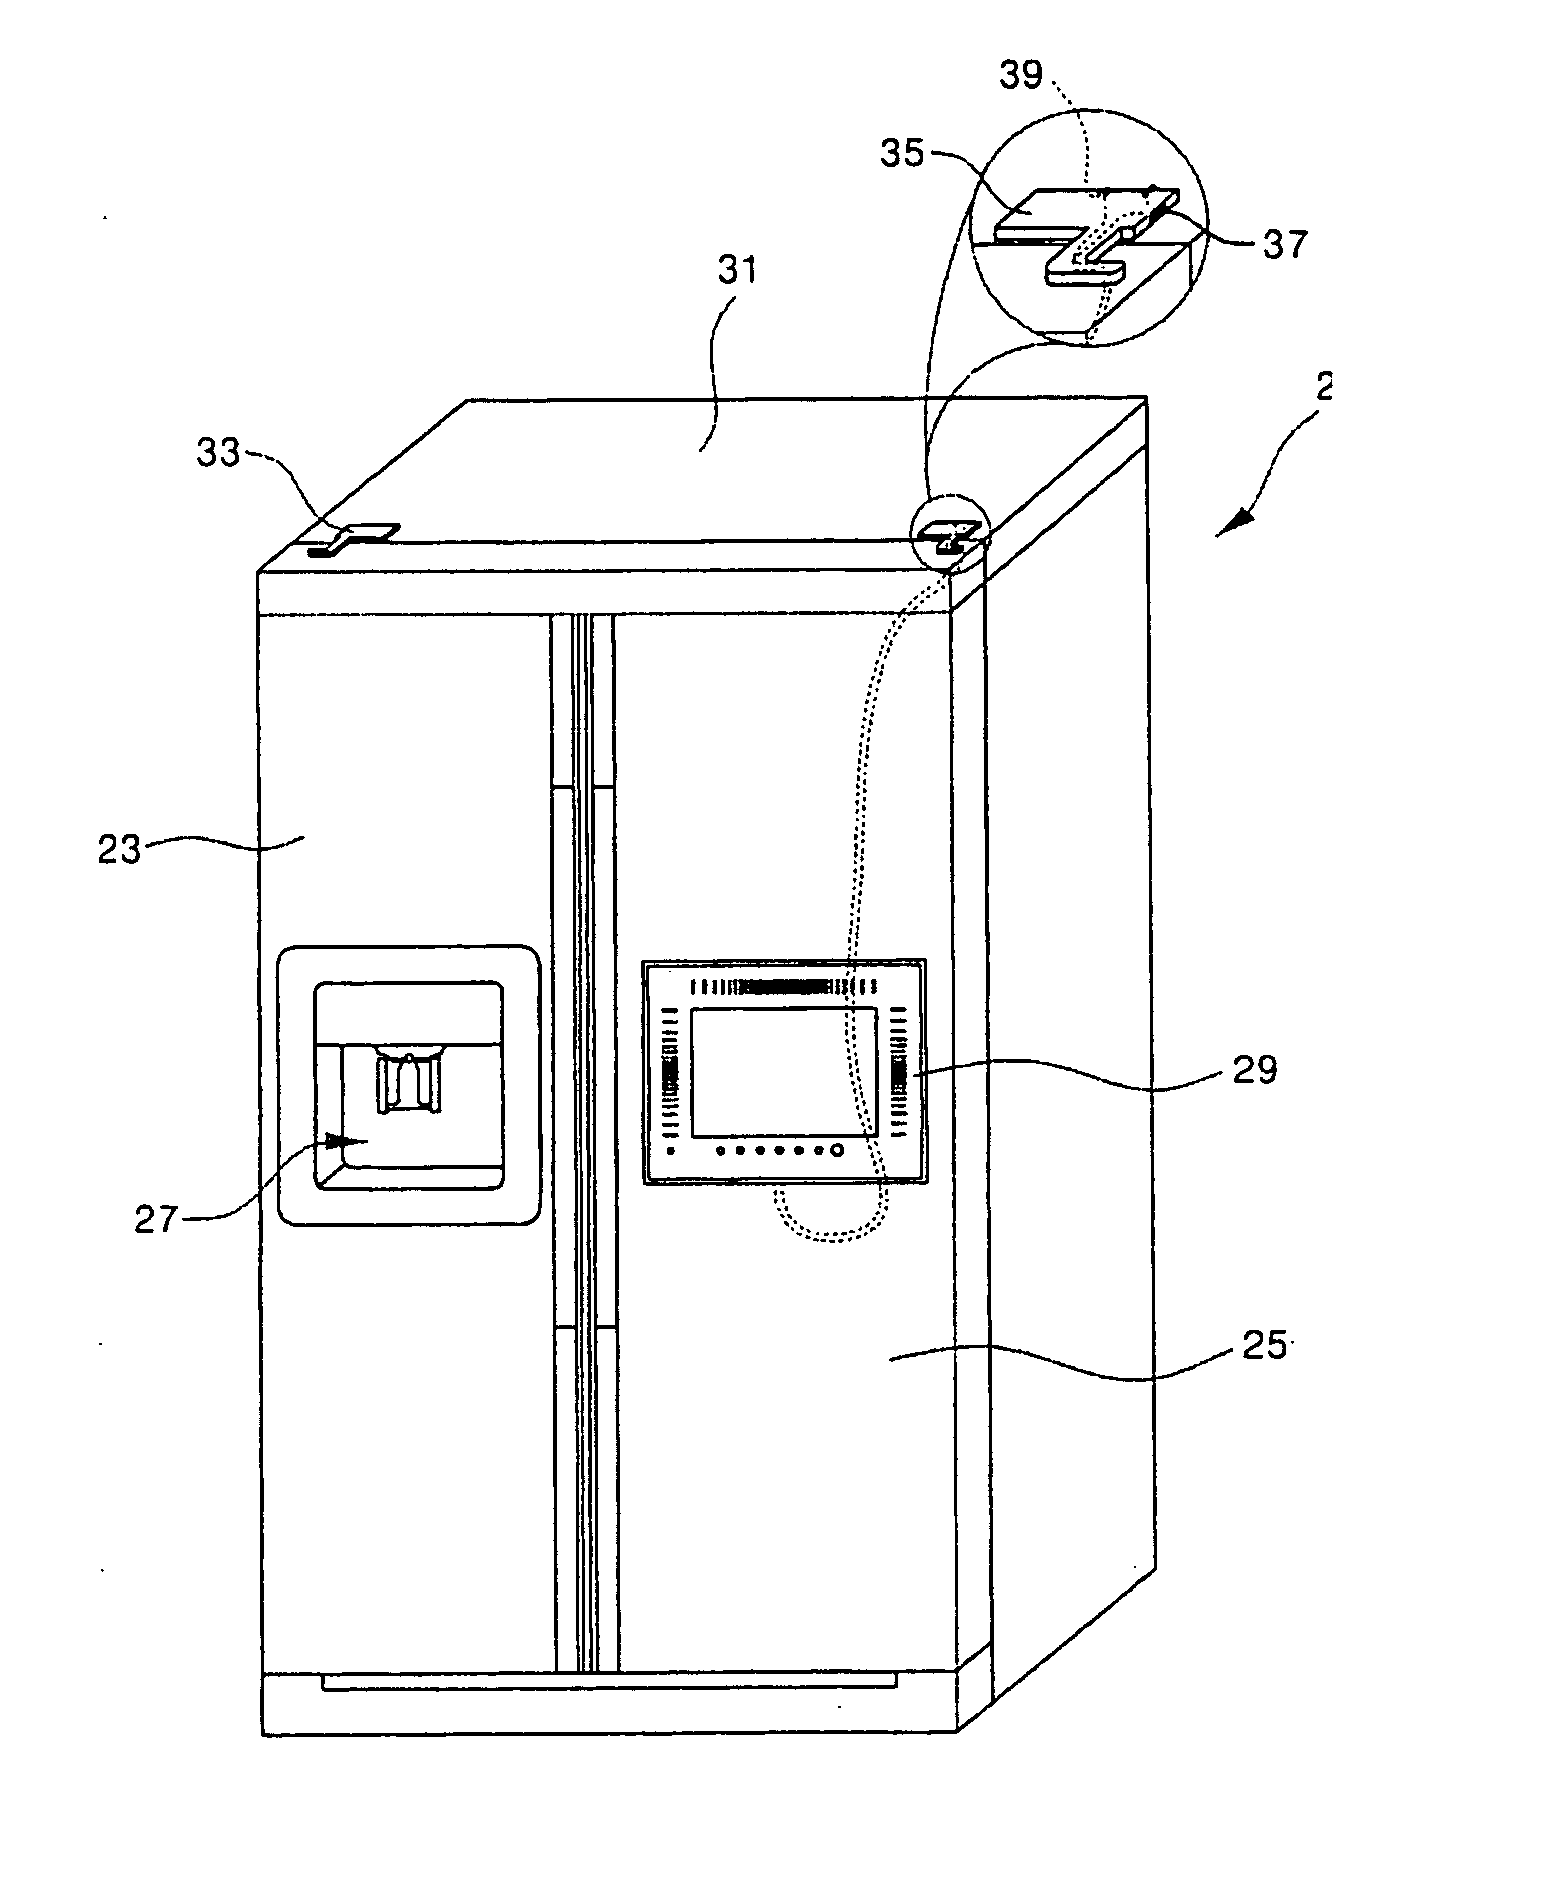 Switching device for refrigerator